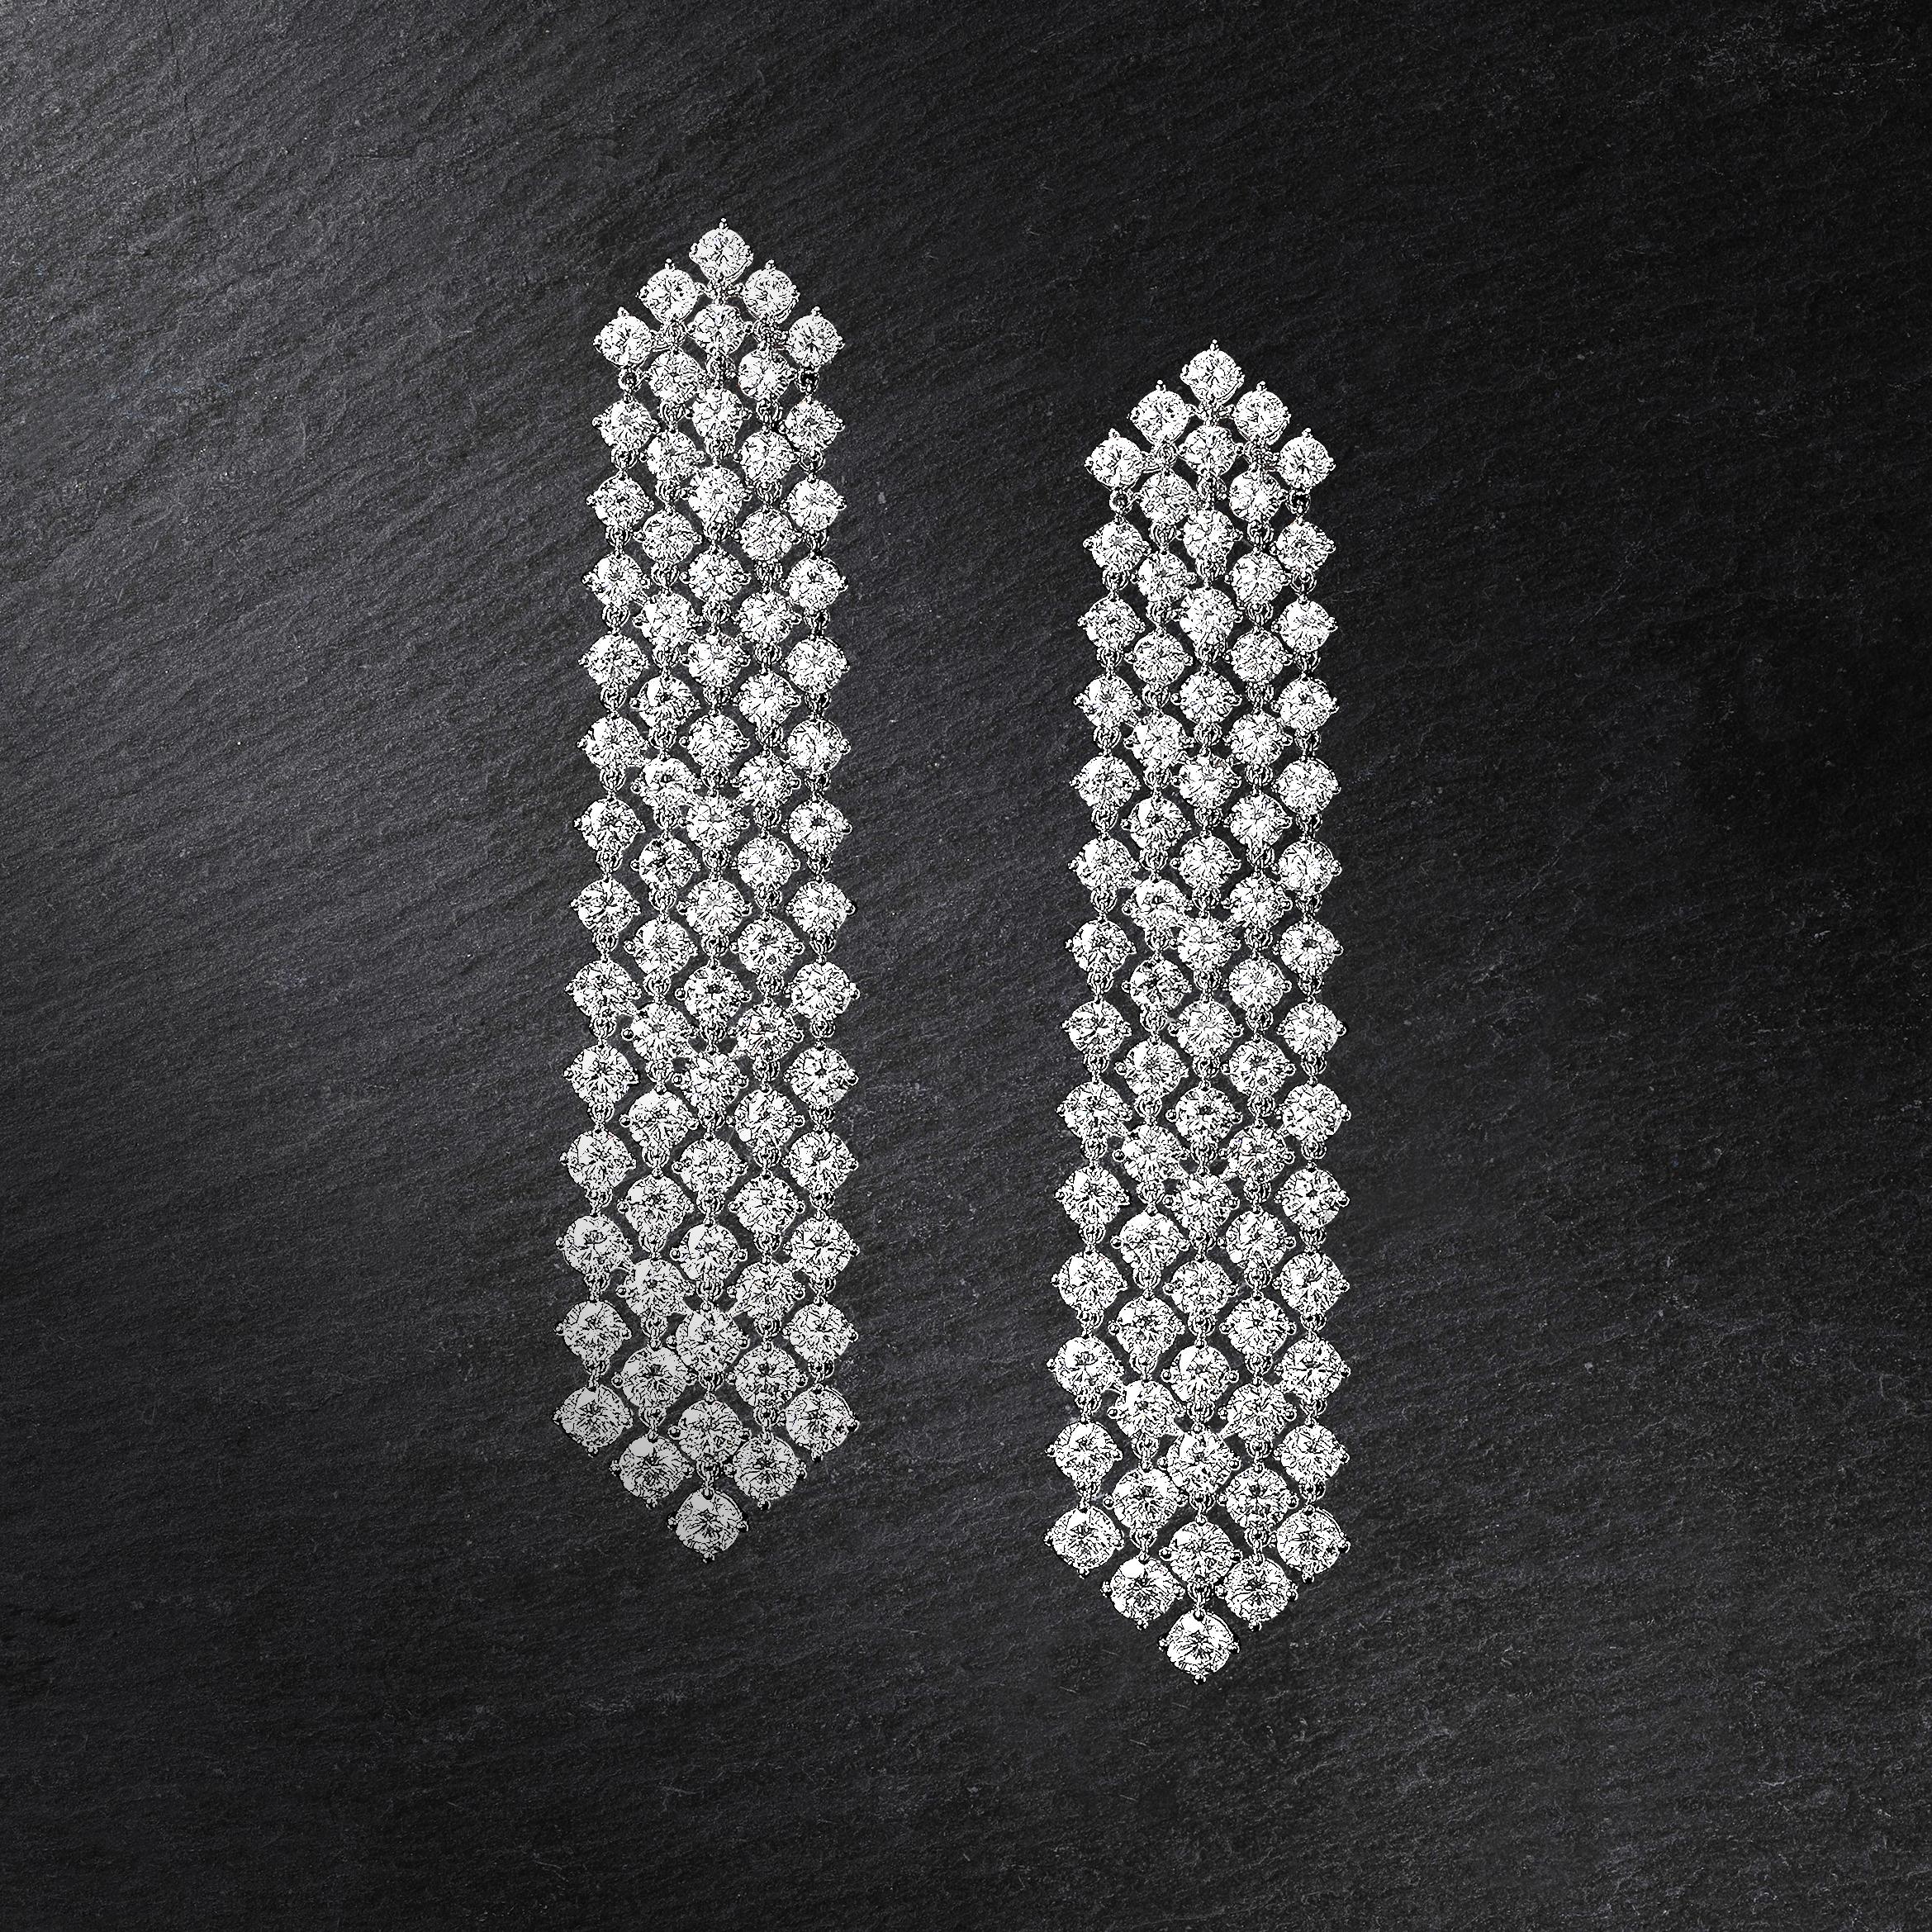 Cascade Round Diamond Earrings.

These magnificent Cascade Round Diamond Earrings are truly stunning! They are 18K white gold and feature 22.67 CARAT diamonds. The length is 8cm, and they are just perfect for that special someone who loves sparkle